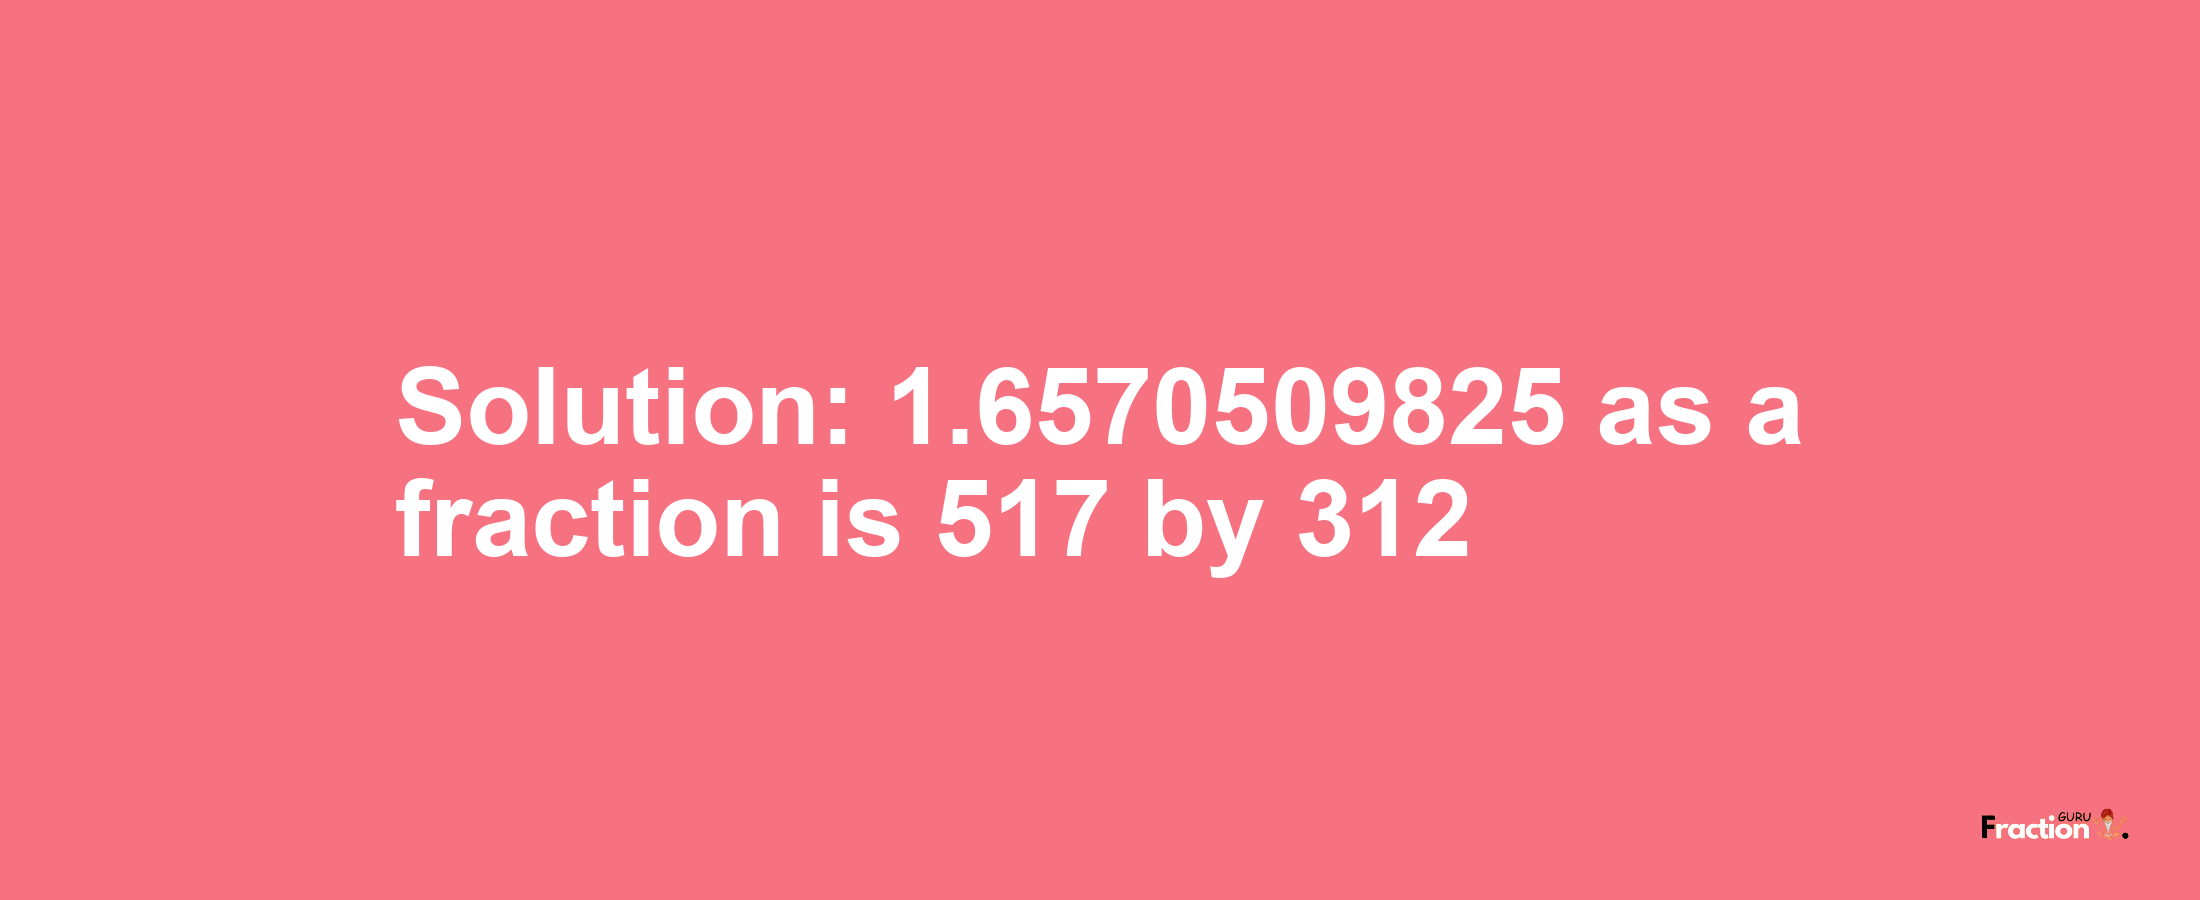 Solution:1.6570509825 as a fraction is 517/312